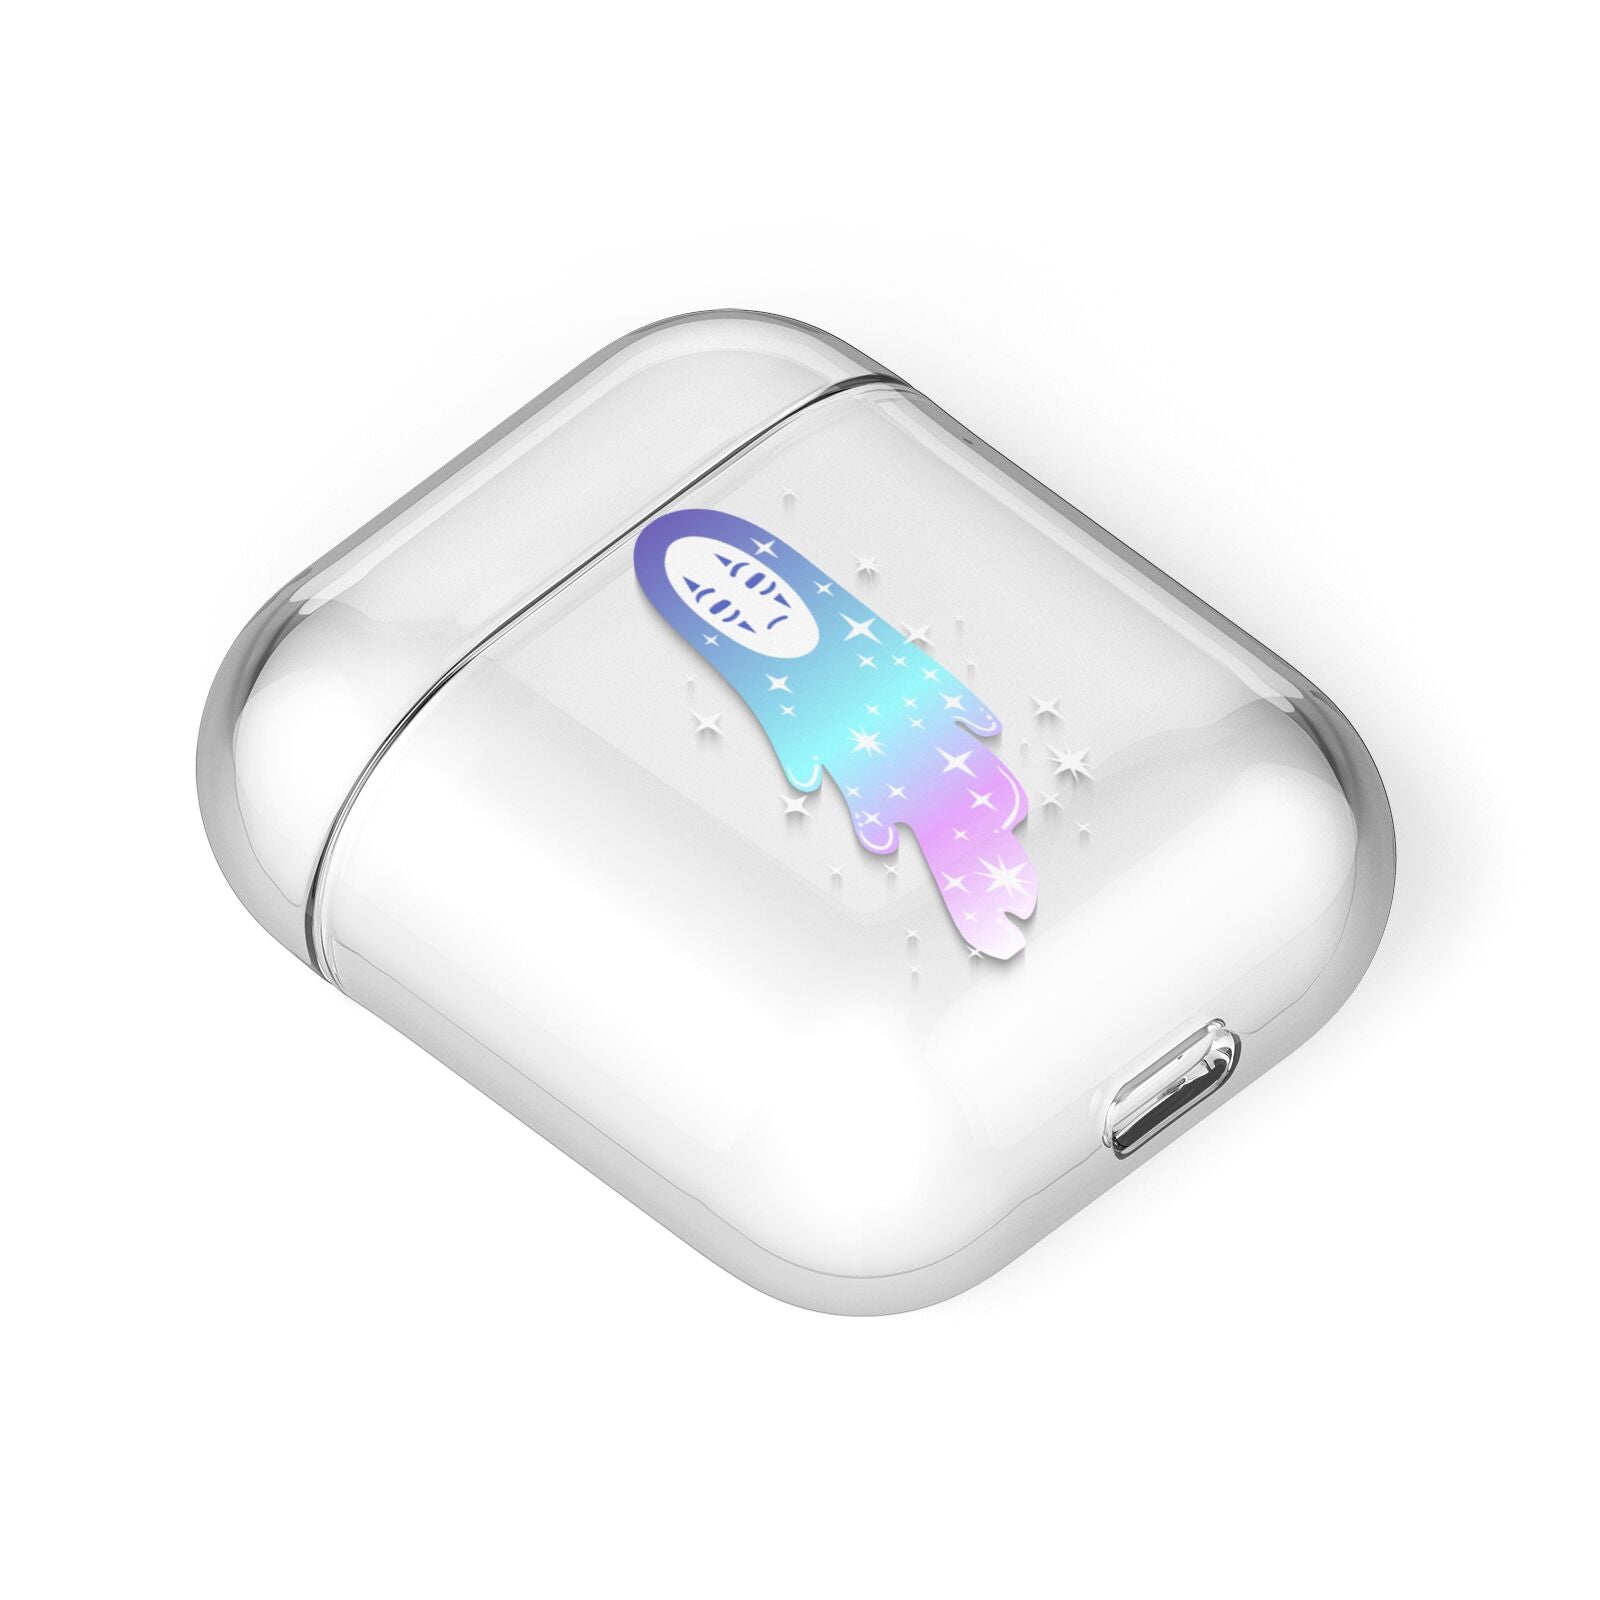 Starry Spectre AirPods Case Laid Flat